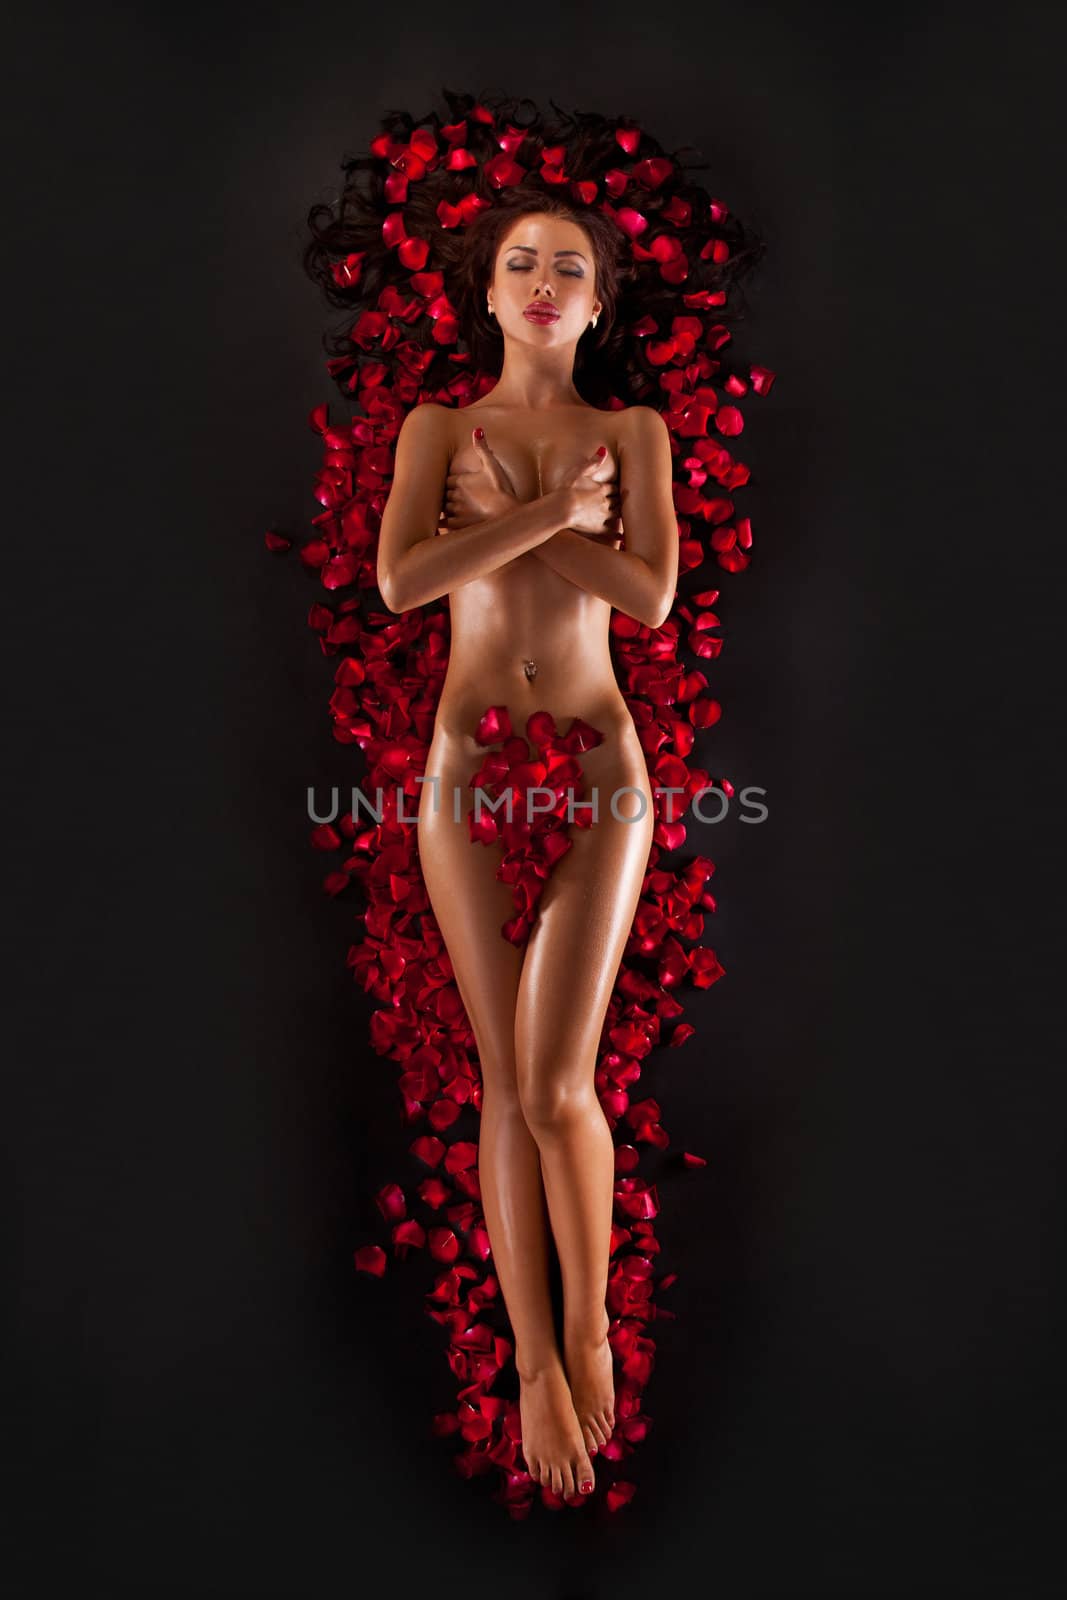 Beautiful woman against petals of red roses isolated on a black background